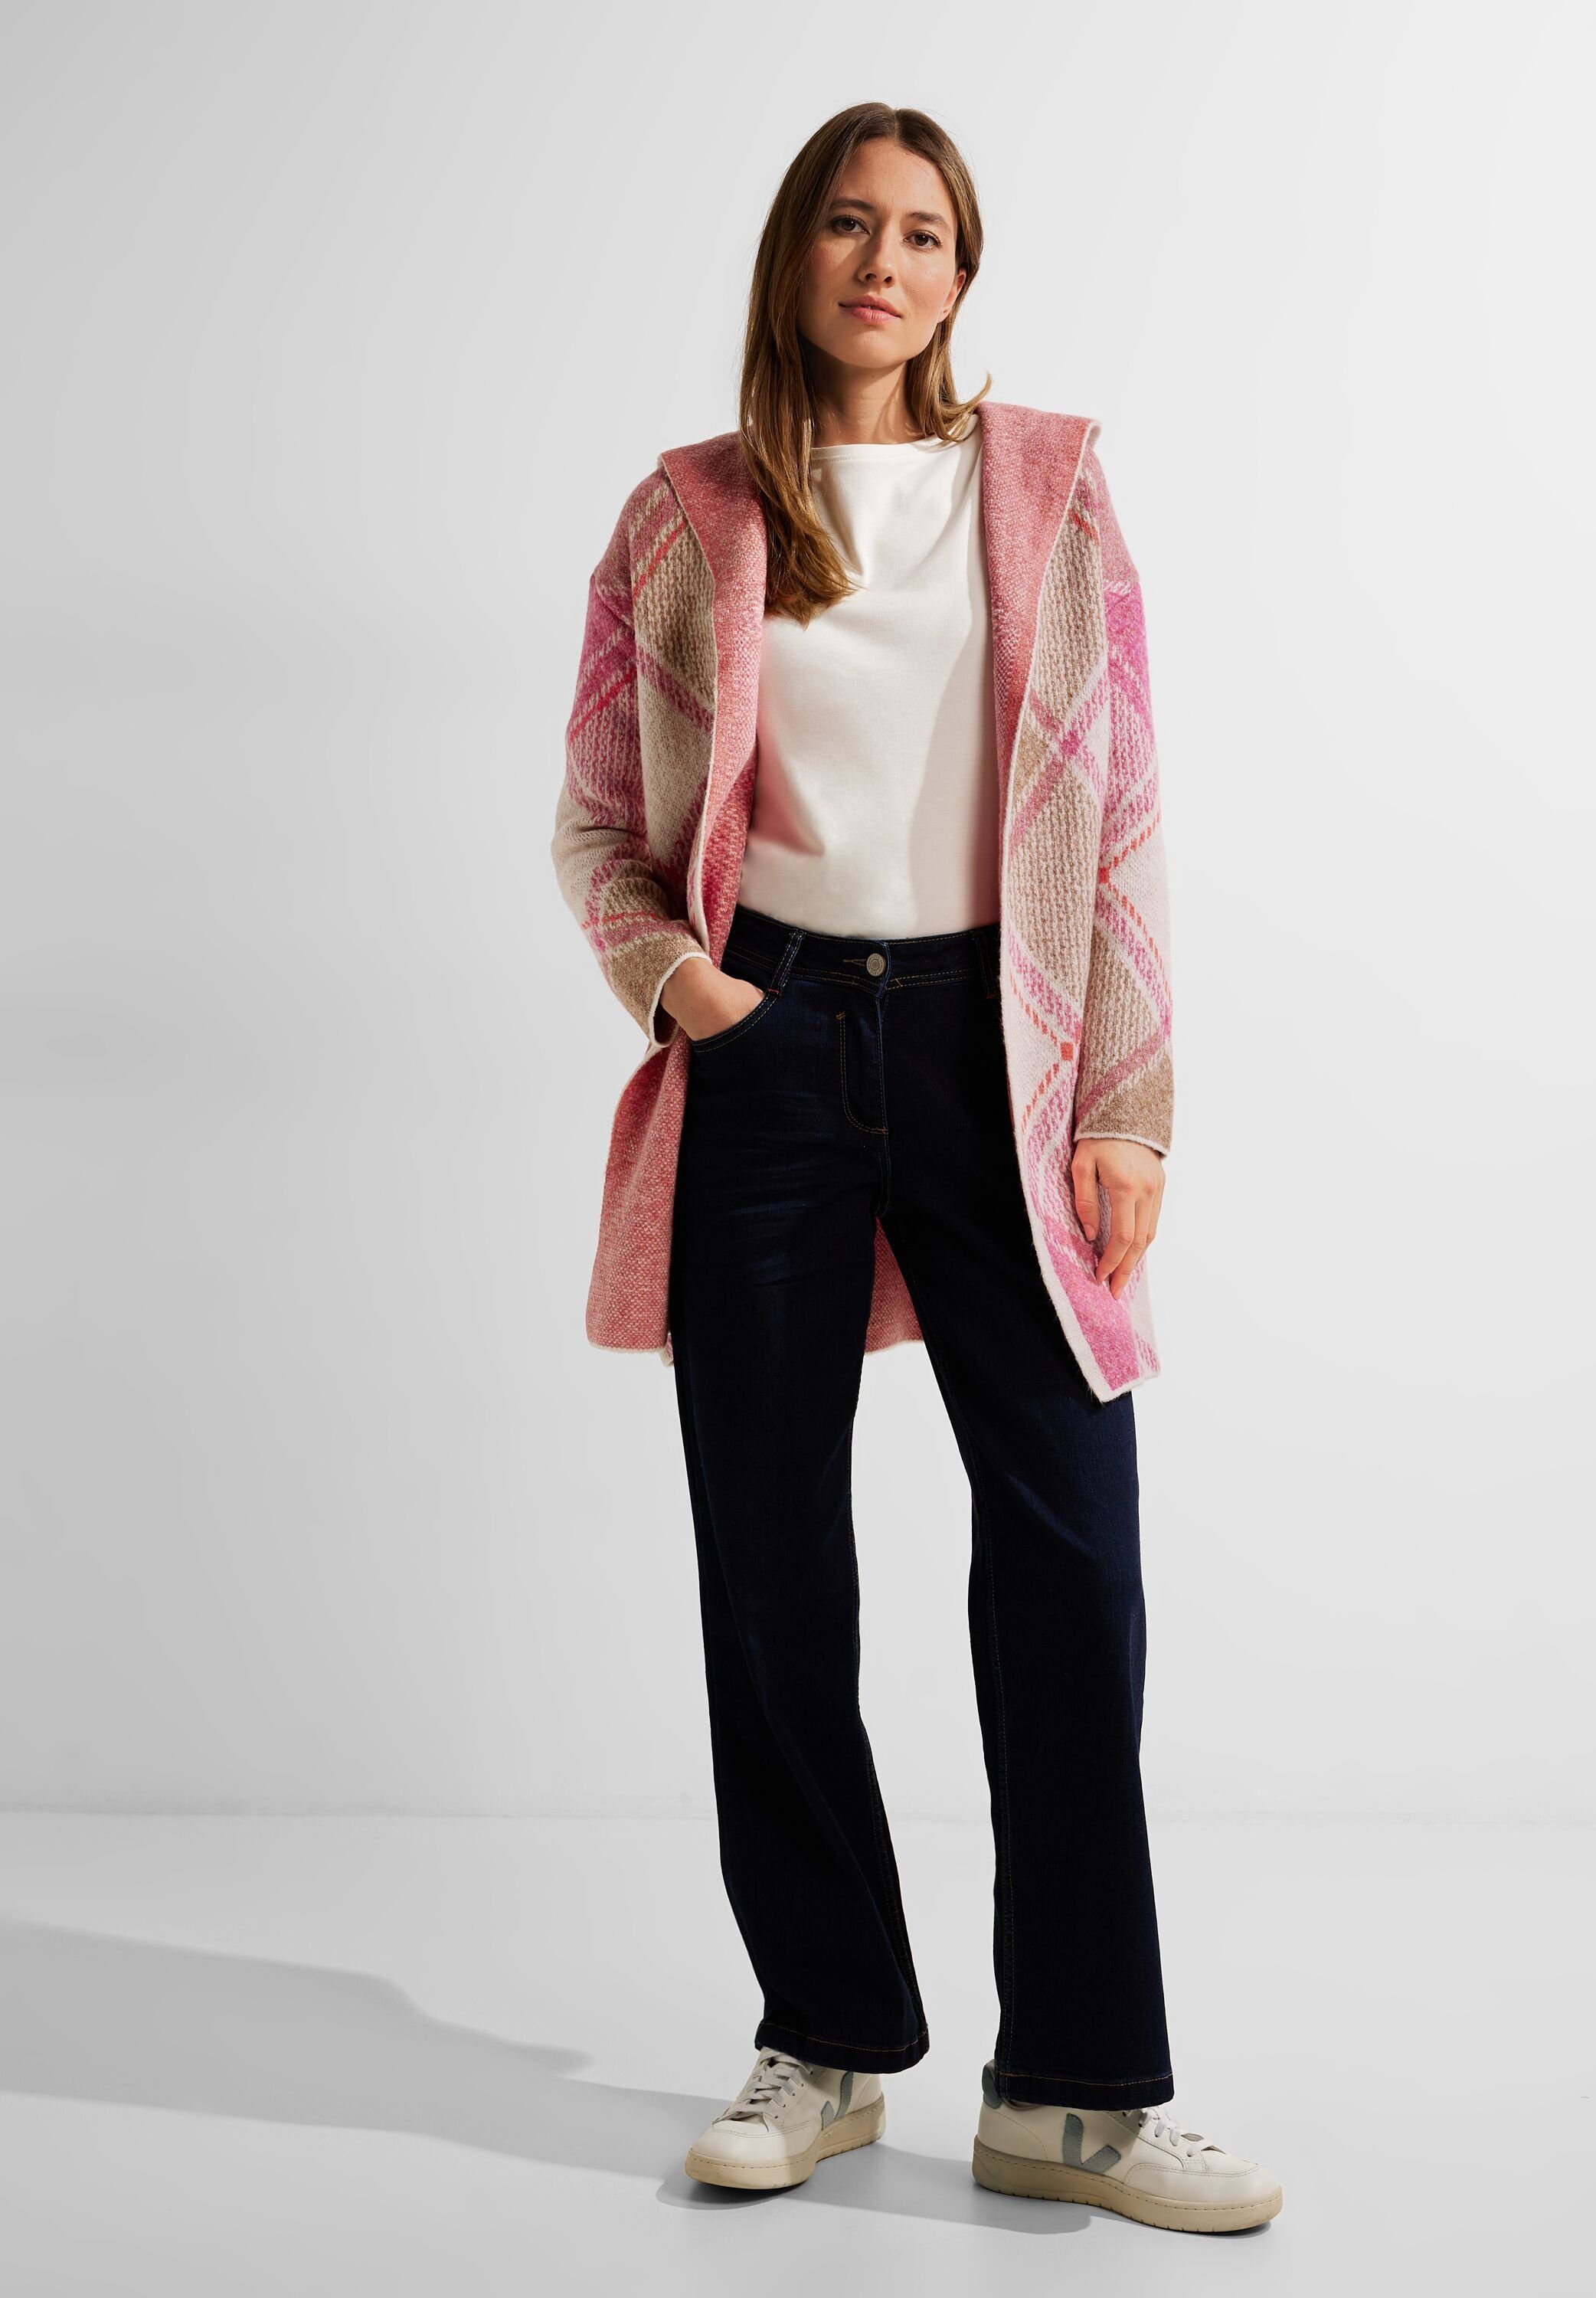 Cardigan Cecil Open Kapuzenstrickjacke cosy Cosy Jacquard-Muster Long coral Jacquard mit Form In